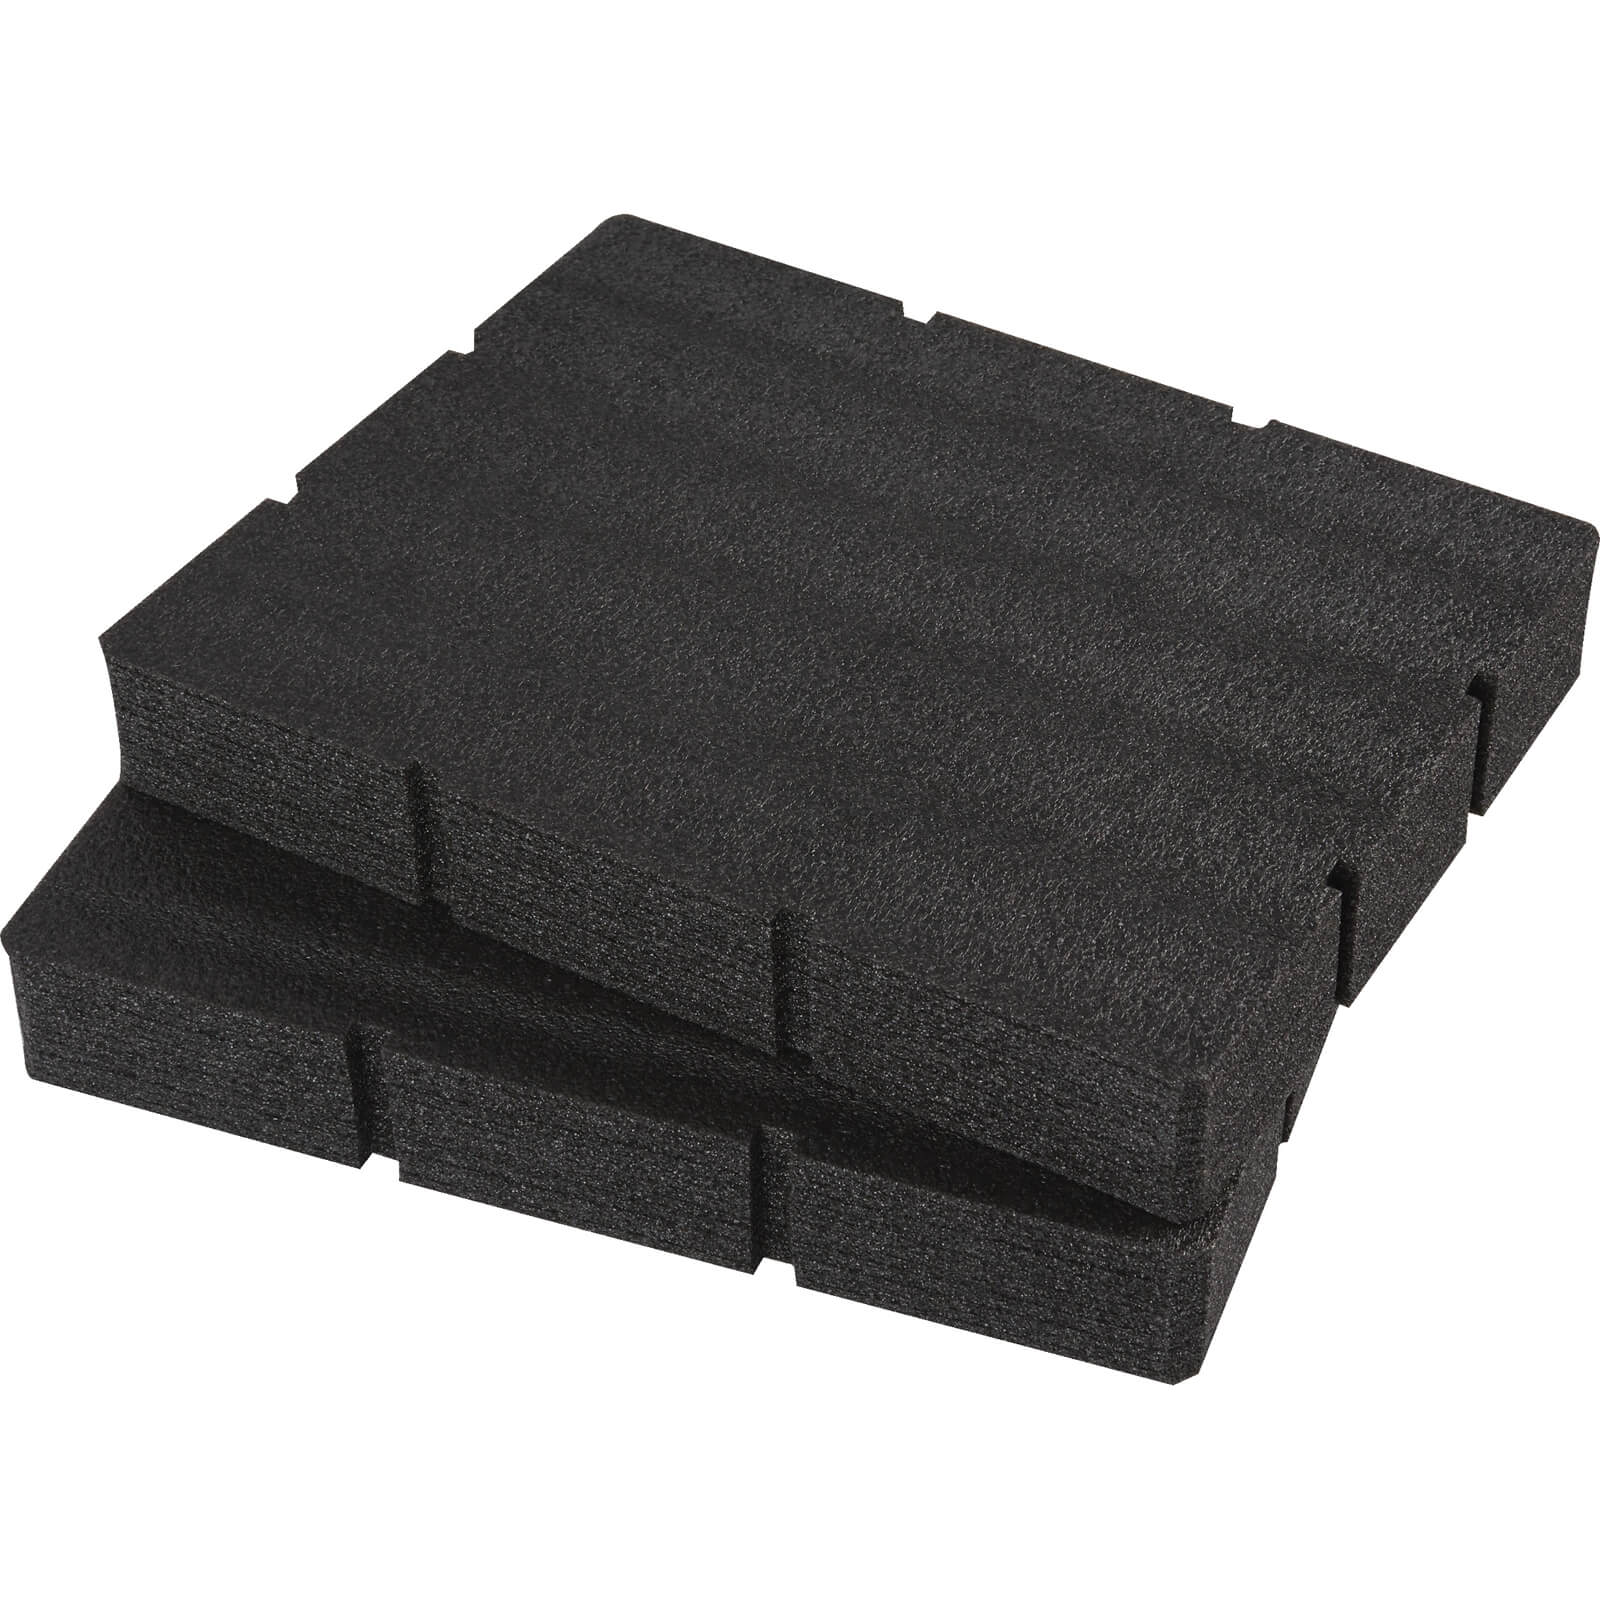 Image of Milwaukee Foam Insert For Packout Drawer Tool Boxes